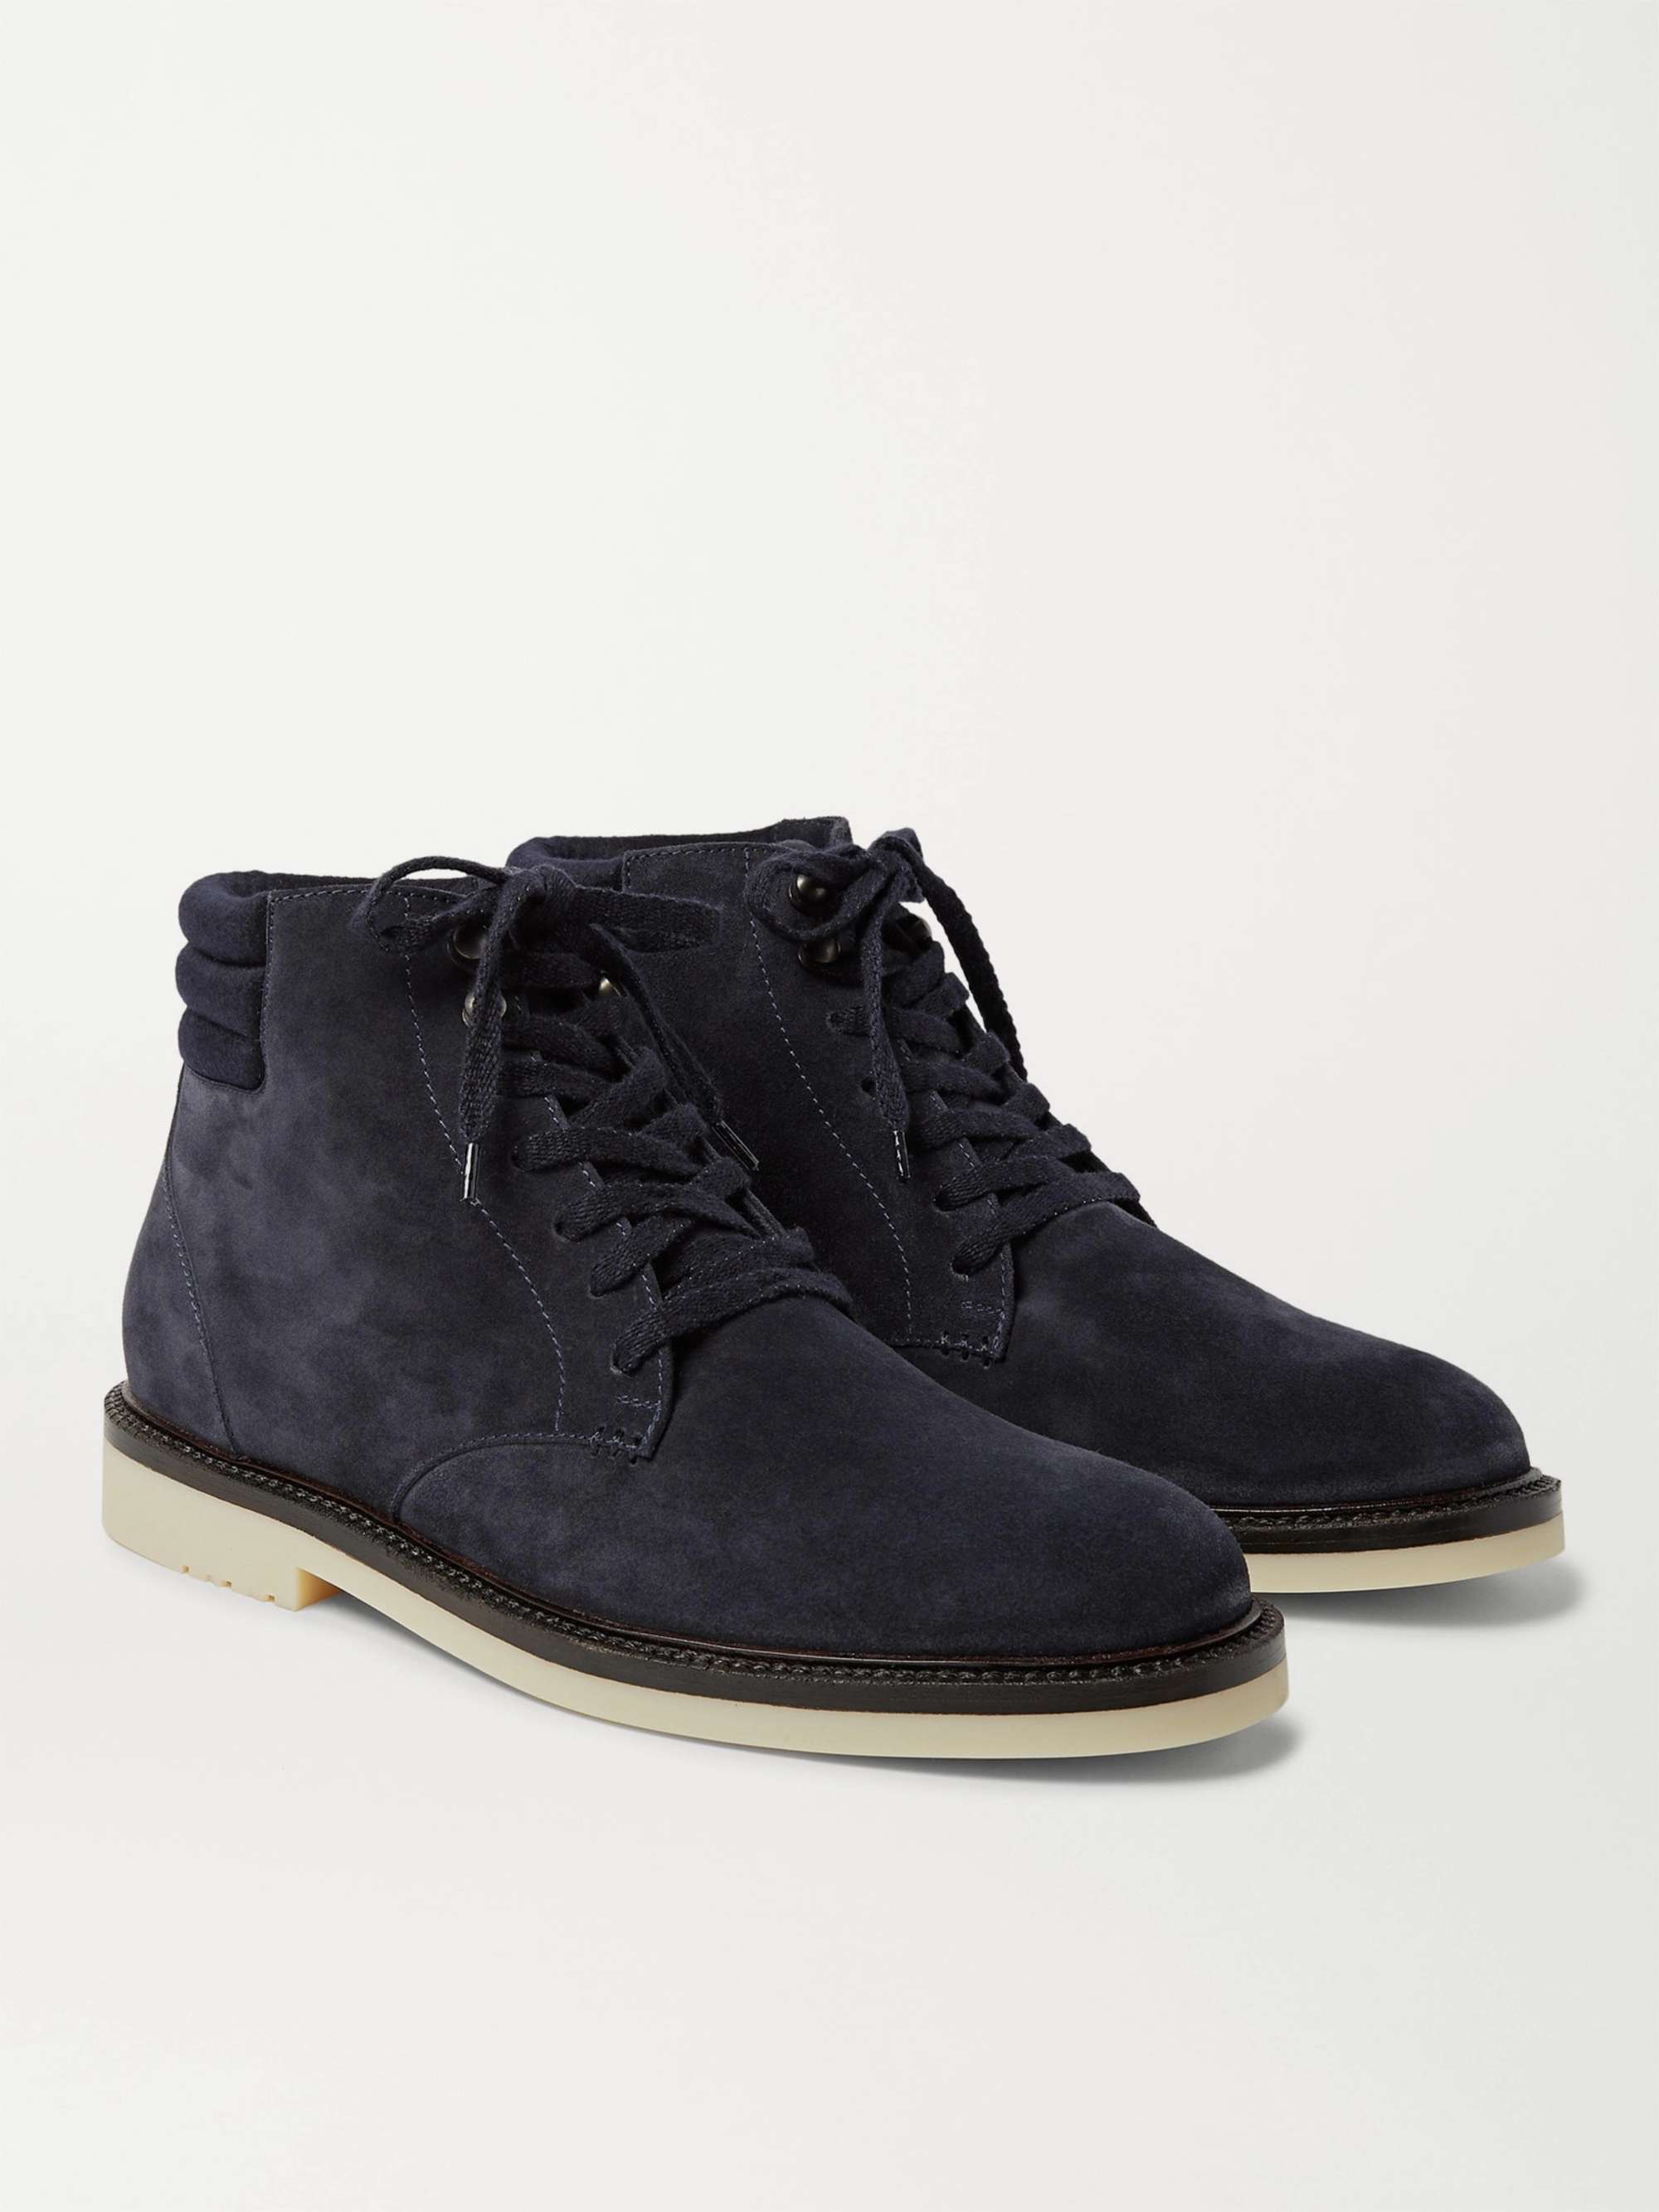 LORO PIANA Icer Walk Cashmere-Lined Water-Repellent Suede Boots